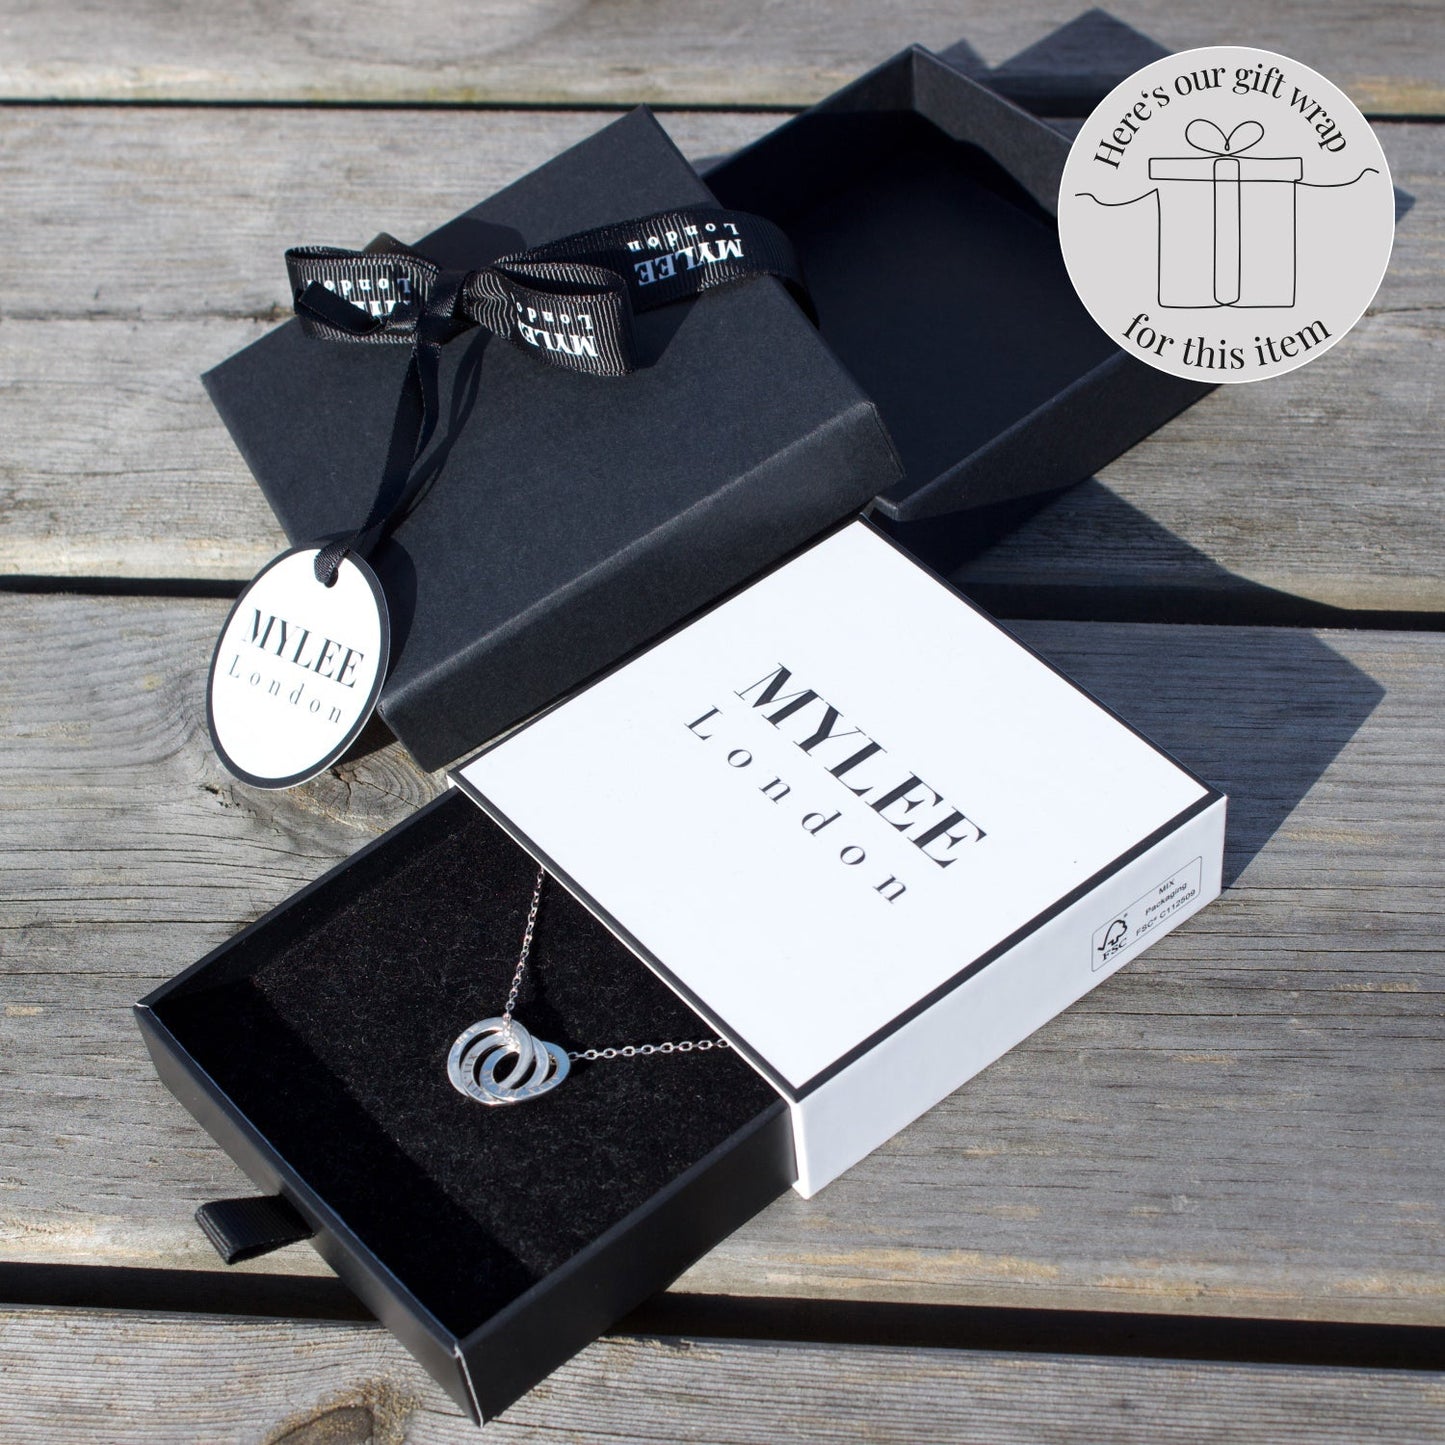 Mother's Day Sterling Silver Personalised Ring Necklace - MYLEE London